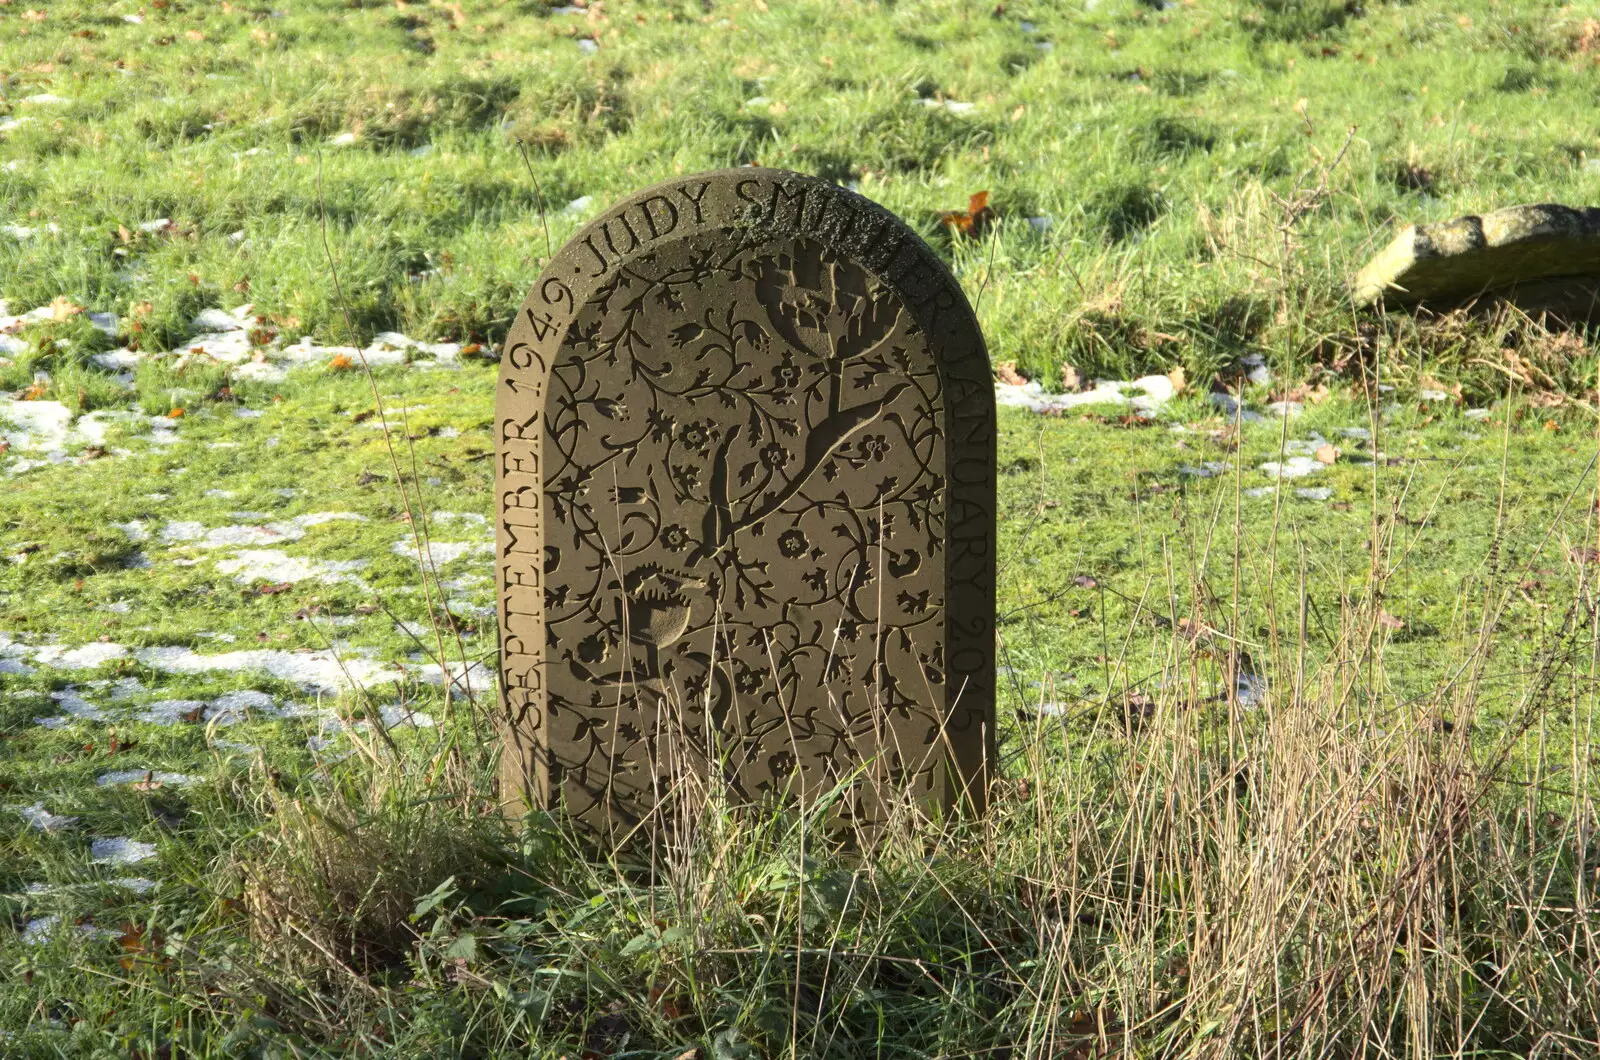 A particularly cool gravestone, from Winter Lockdown Walks, Thrandeston and Brome, Suffolk - 24th January 2021